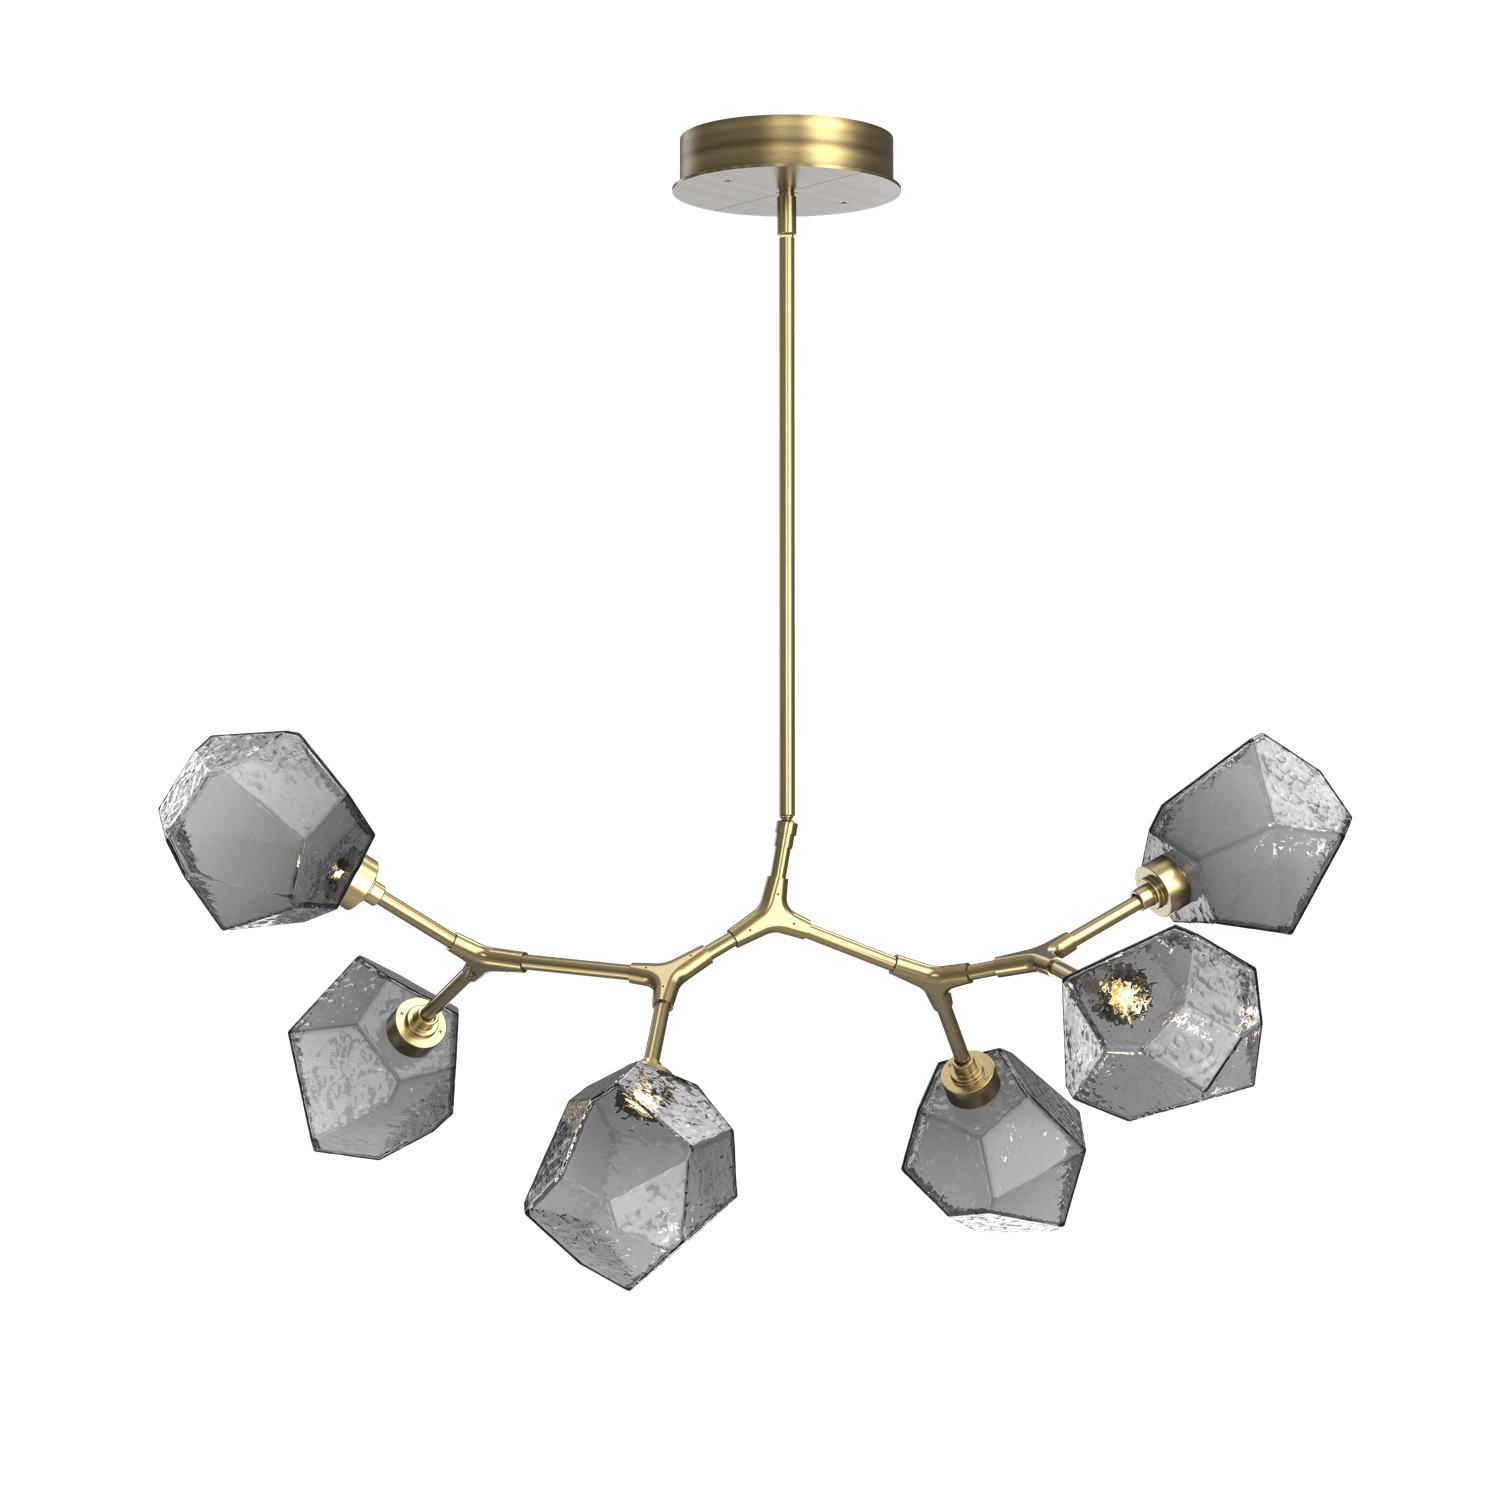 PLB0039-BA-HB-S-Hammerton-Studio-Gem-6-light-modern-branch-chandelier-with-heritage-brass-finish-and-smoke-blown-glass-shades-and-LED-lamping